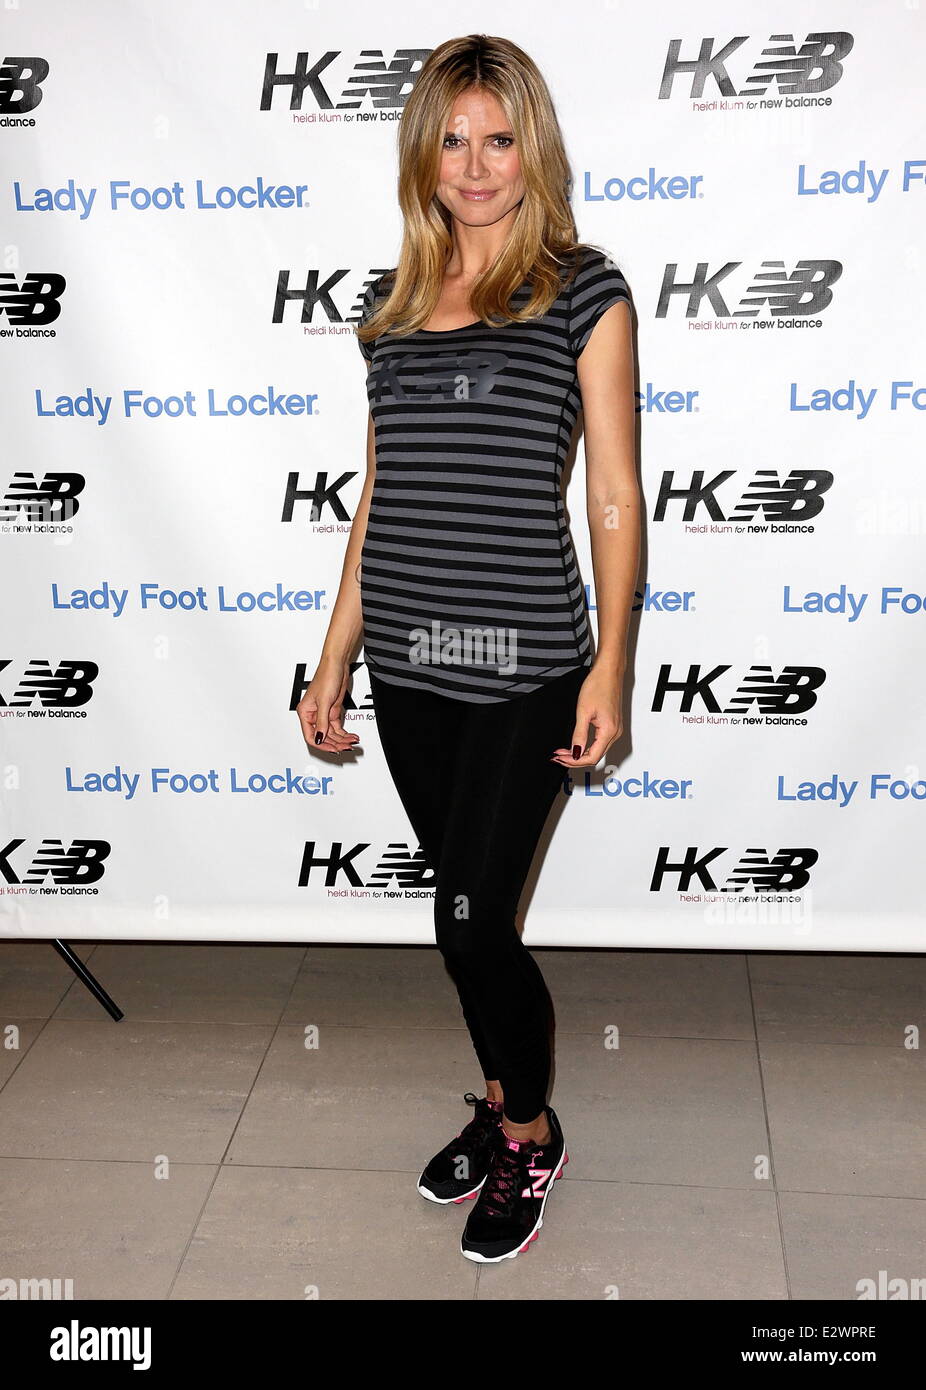 Heidi Klum launches the new 'Heidi Klum for New Balance Collection' at the  Lady Foot Locker at Westfield Culver City Featuring: Heidi Klum Where: Los  Angeles, California, United States When: 14 Mar